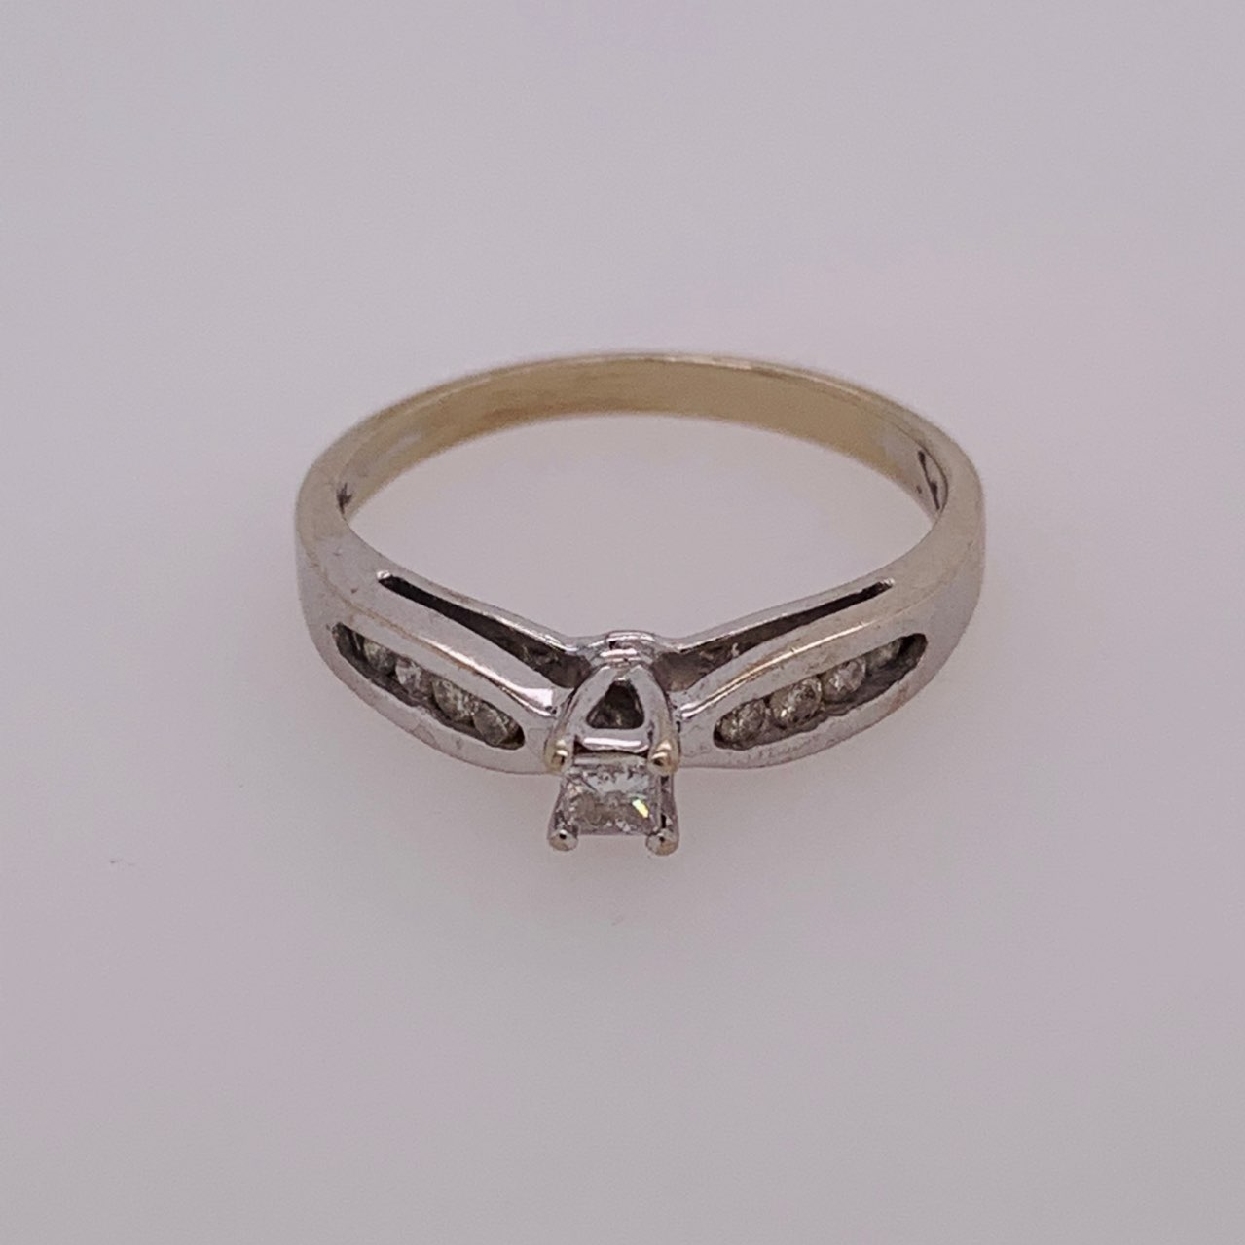 10k White Gold Engagement Ring with Princess Cut Center Stone in a Cathedral Setting with 8 round Diamonds on the Shank. Size 6